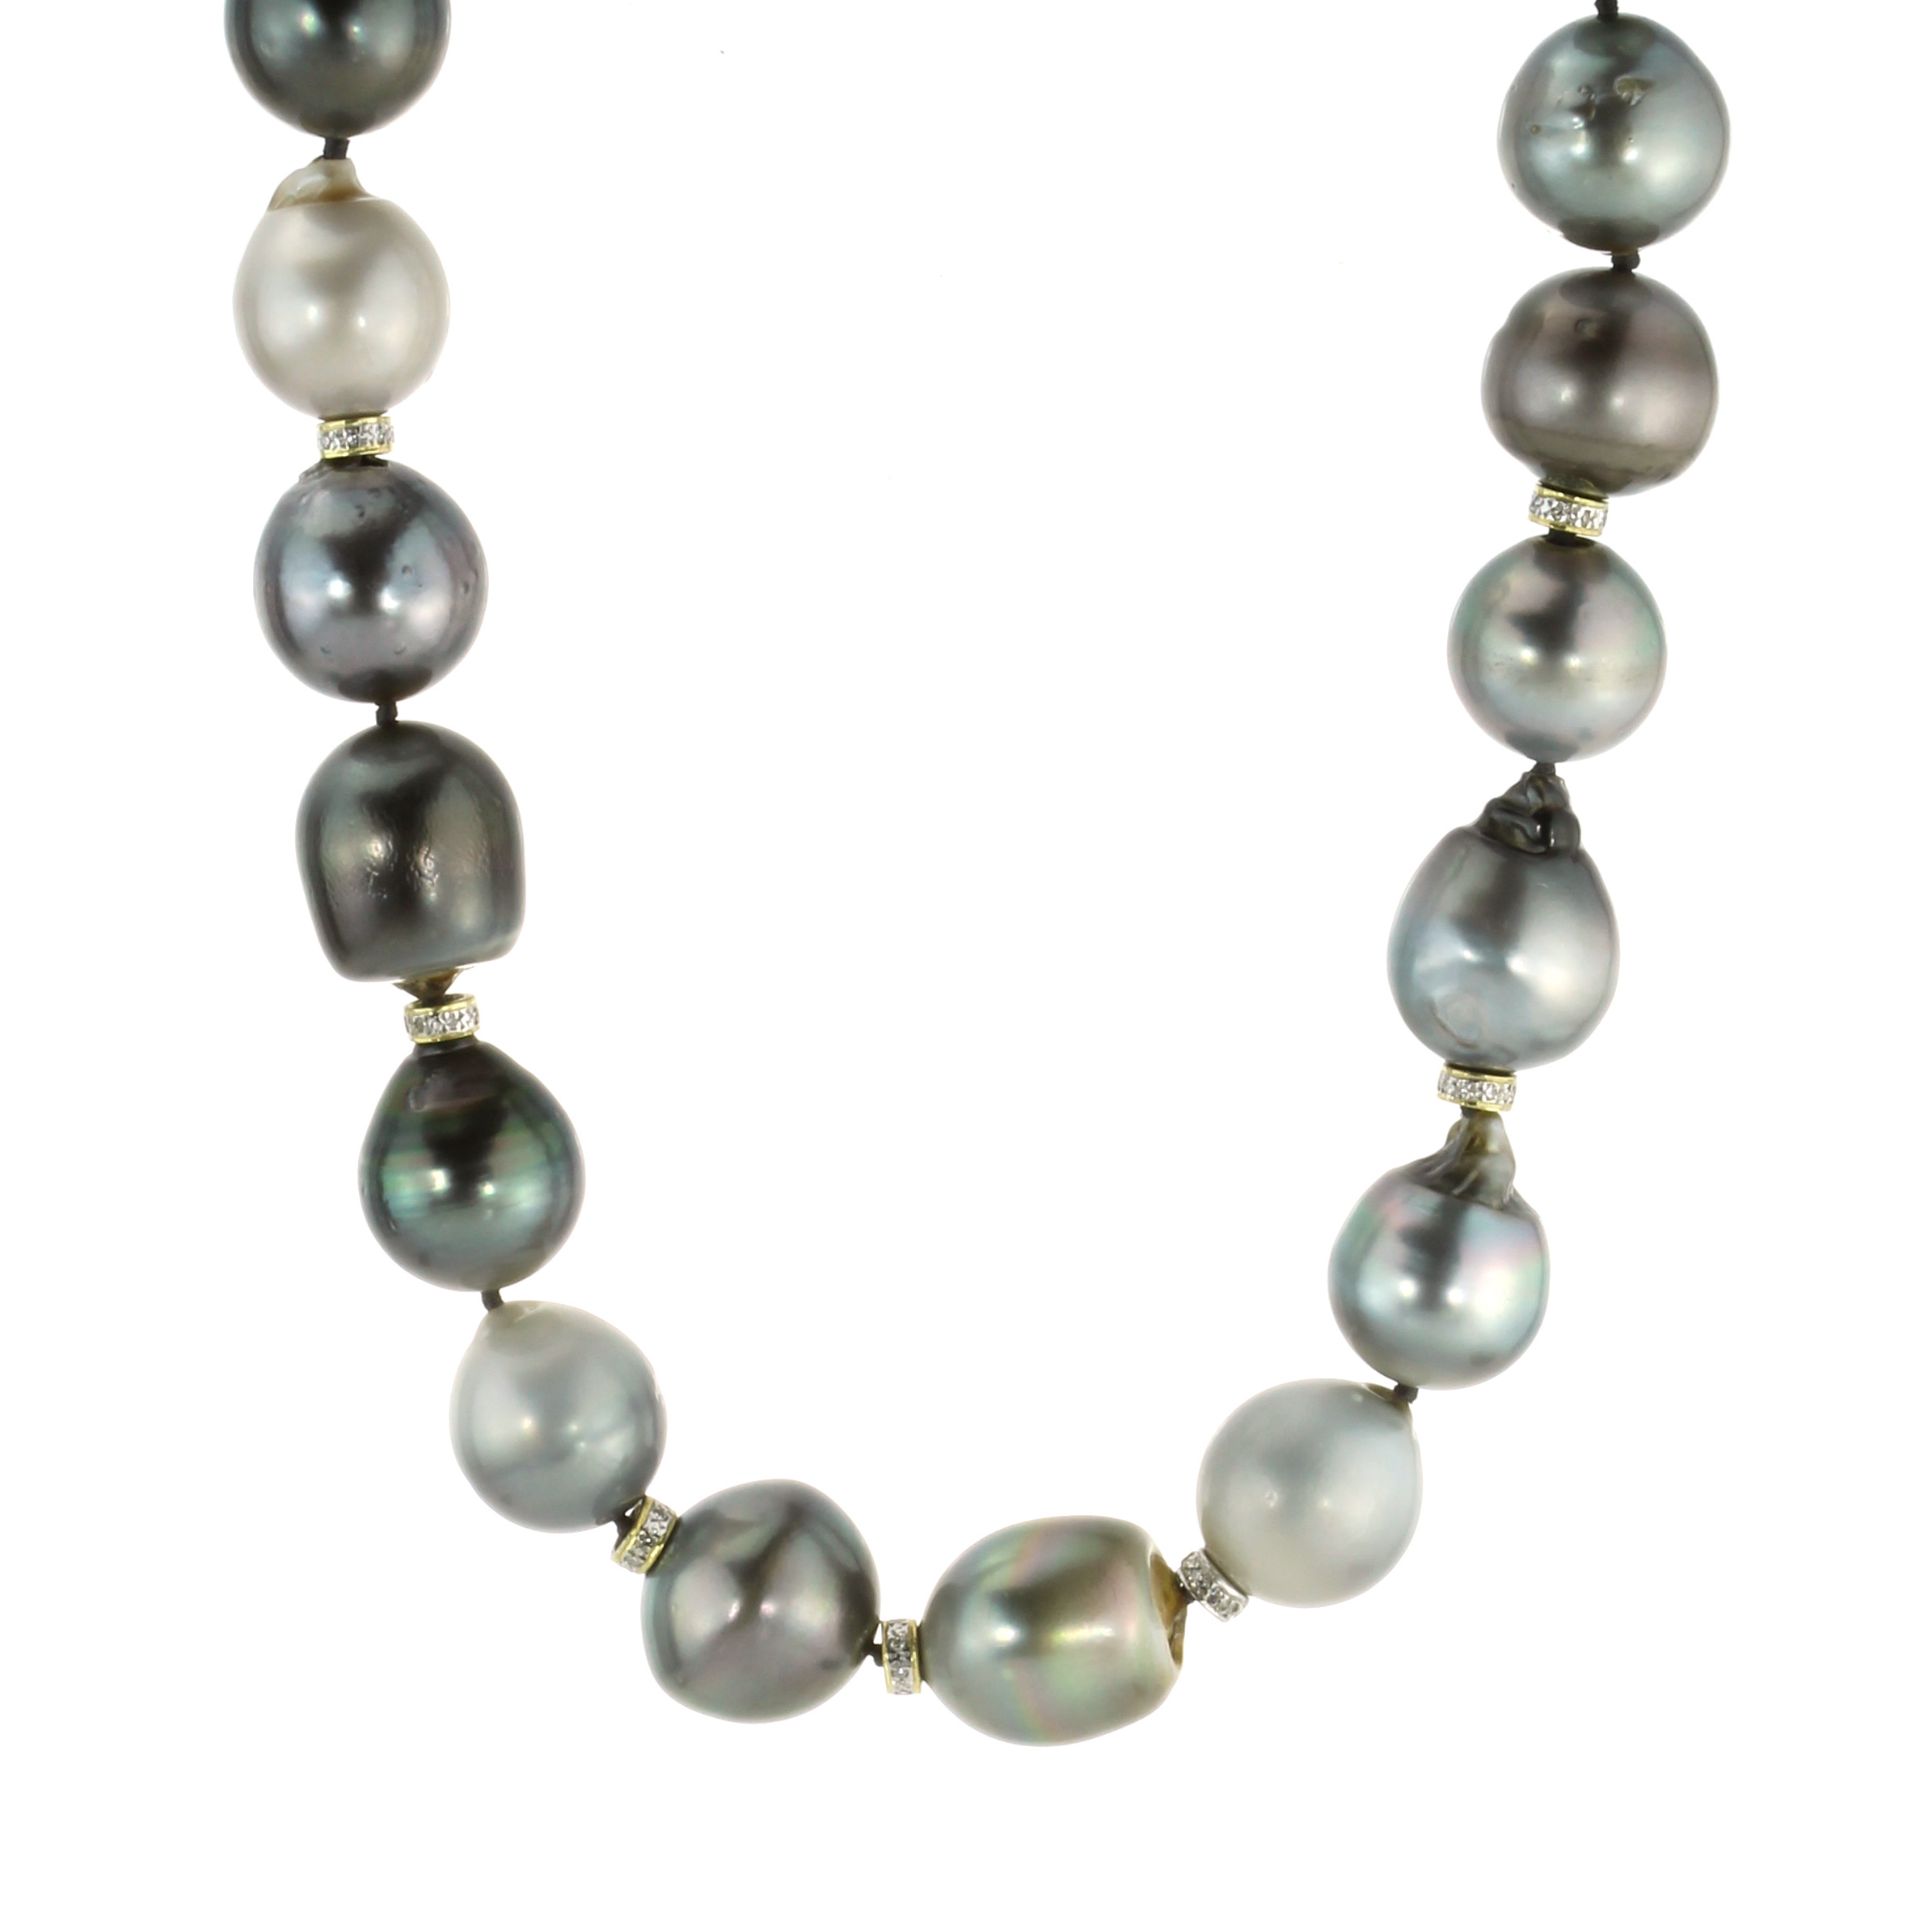 A SOUTH SEA PEARL AND DIAMOND NECKLACE in yellow gold comprising a single row of large, grey pearls,